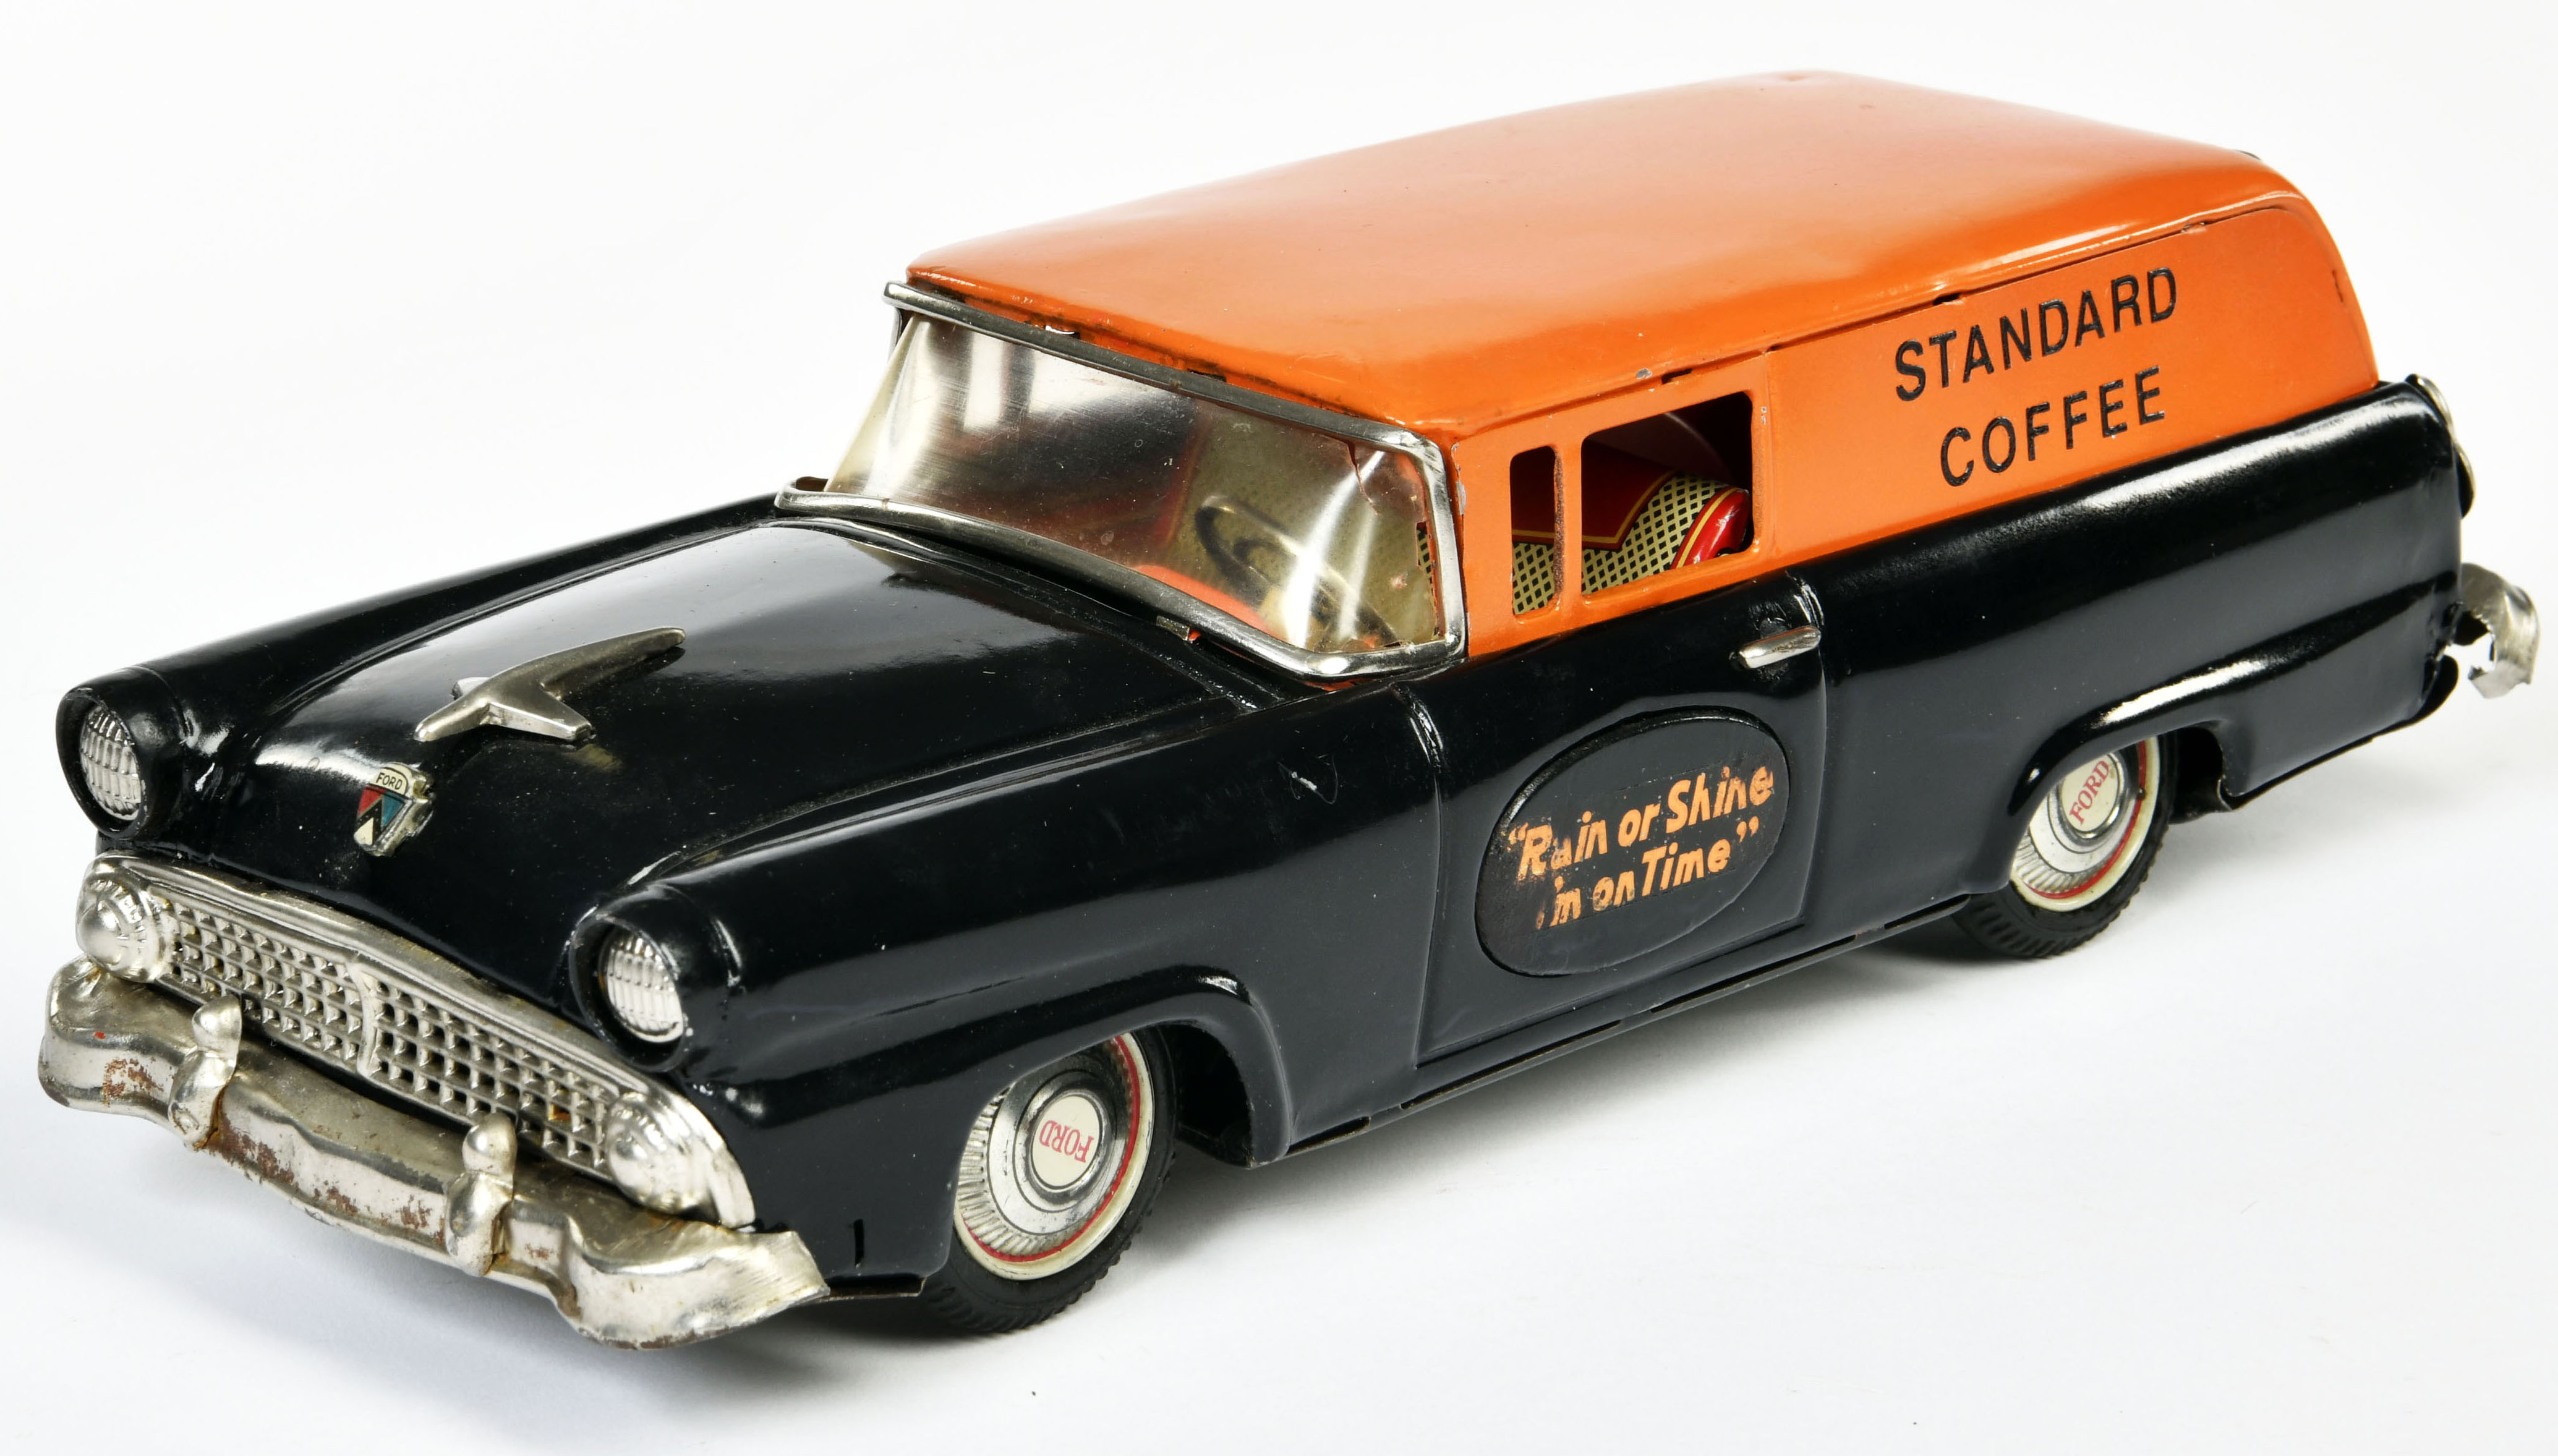 Bandai, Ford Standard Coffee, Japan, 30 cm, tin, restored, paint d., please inspect - Image 2 of 3